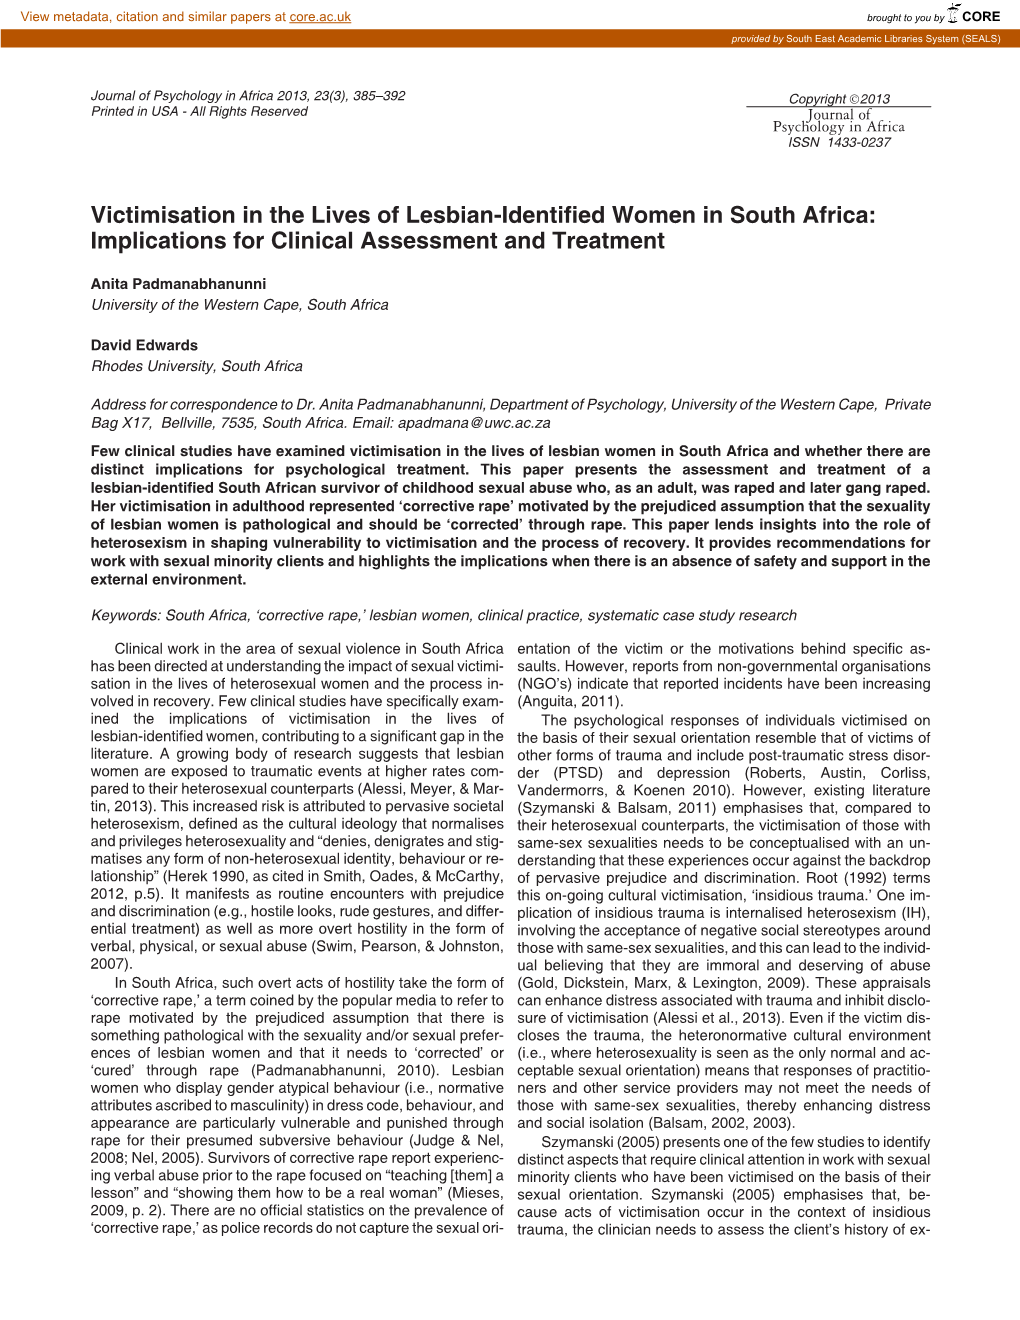 Victimisation in the Lives of Lesbian-Identified Women in South Africa: Implications for Clinical Assessment and Treatment